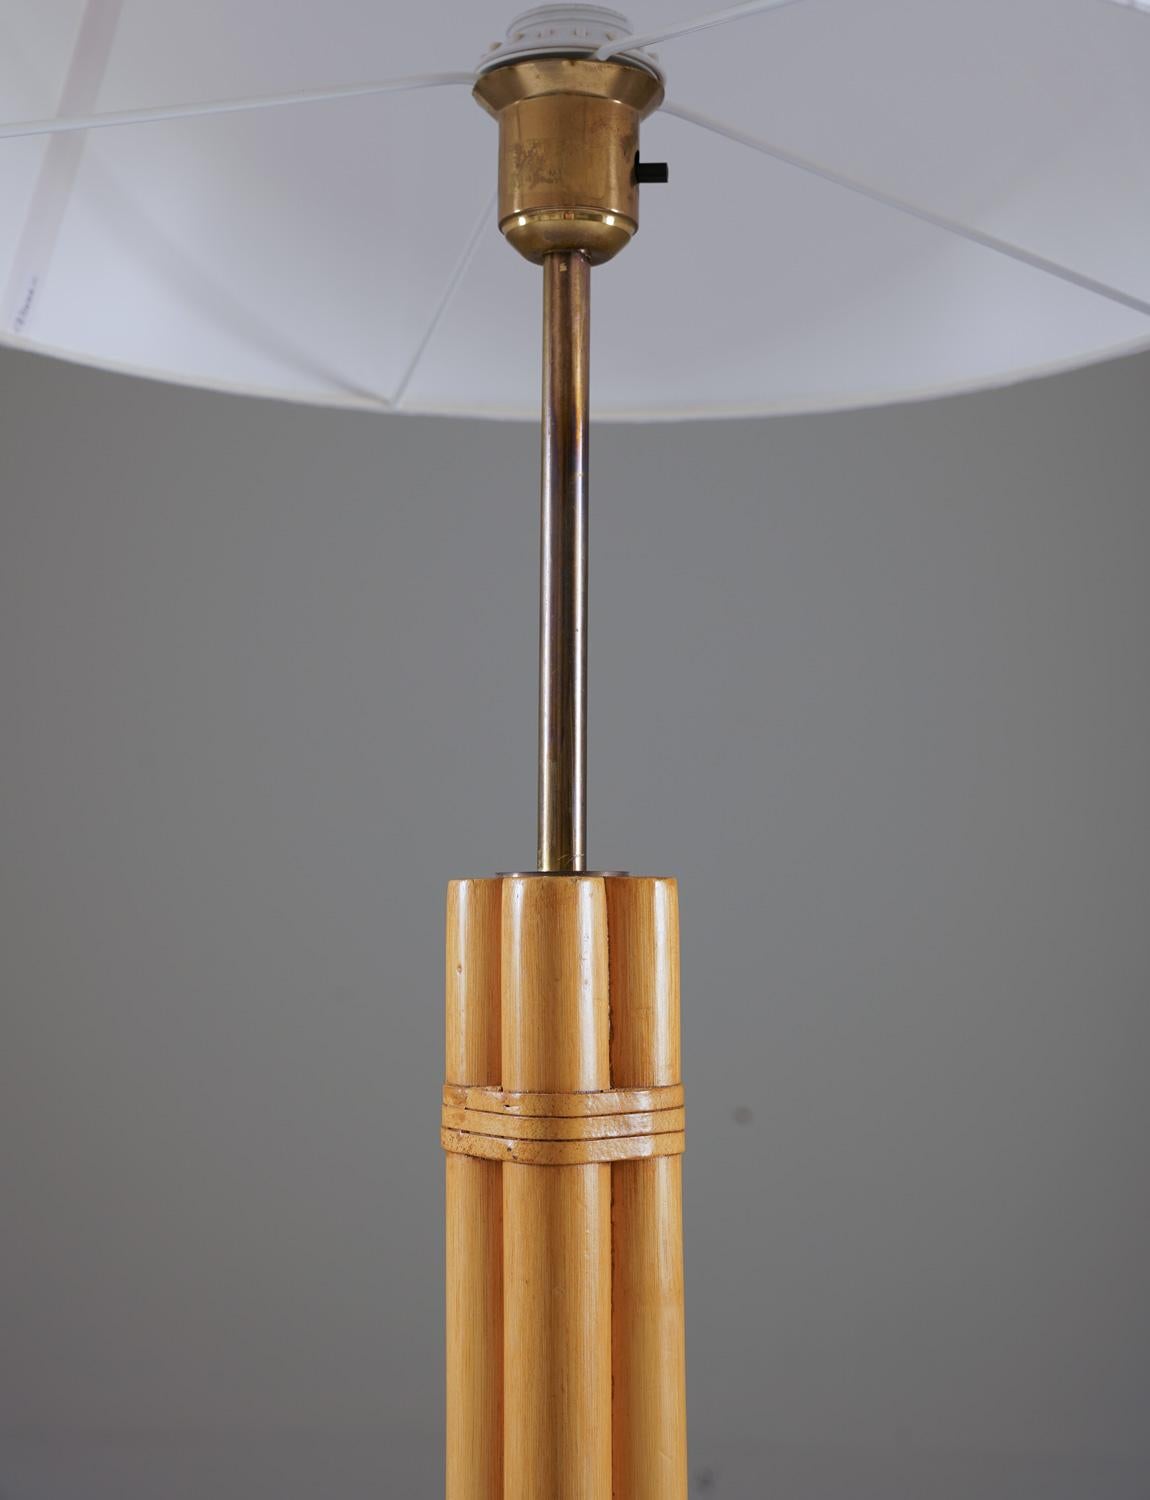 Swedish Scandinavian Midcentury Floor Lamp in Brass and Bamboo by Bergboms, Sweden For Sale